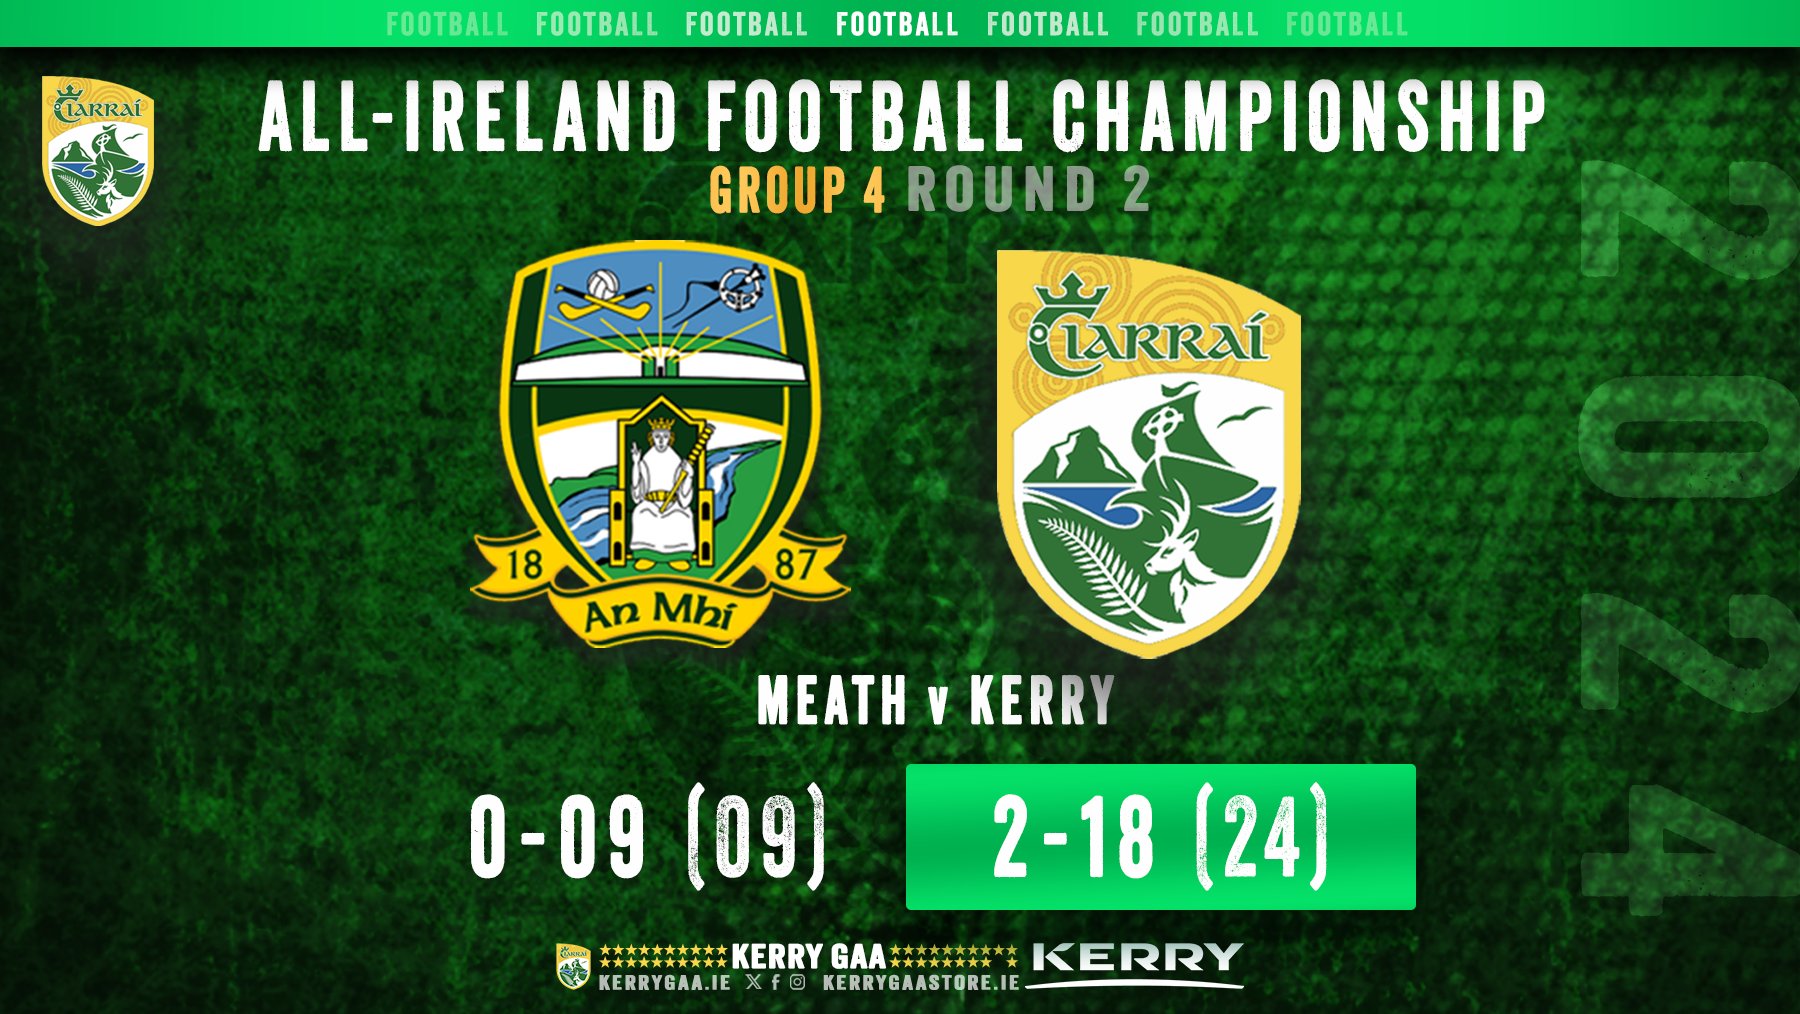 Win for Kerry over Meath in All-Ireland SFC, Gp 4